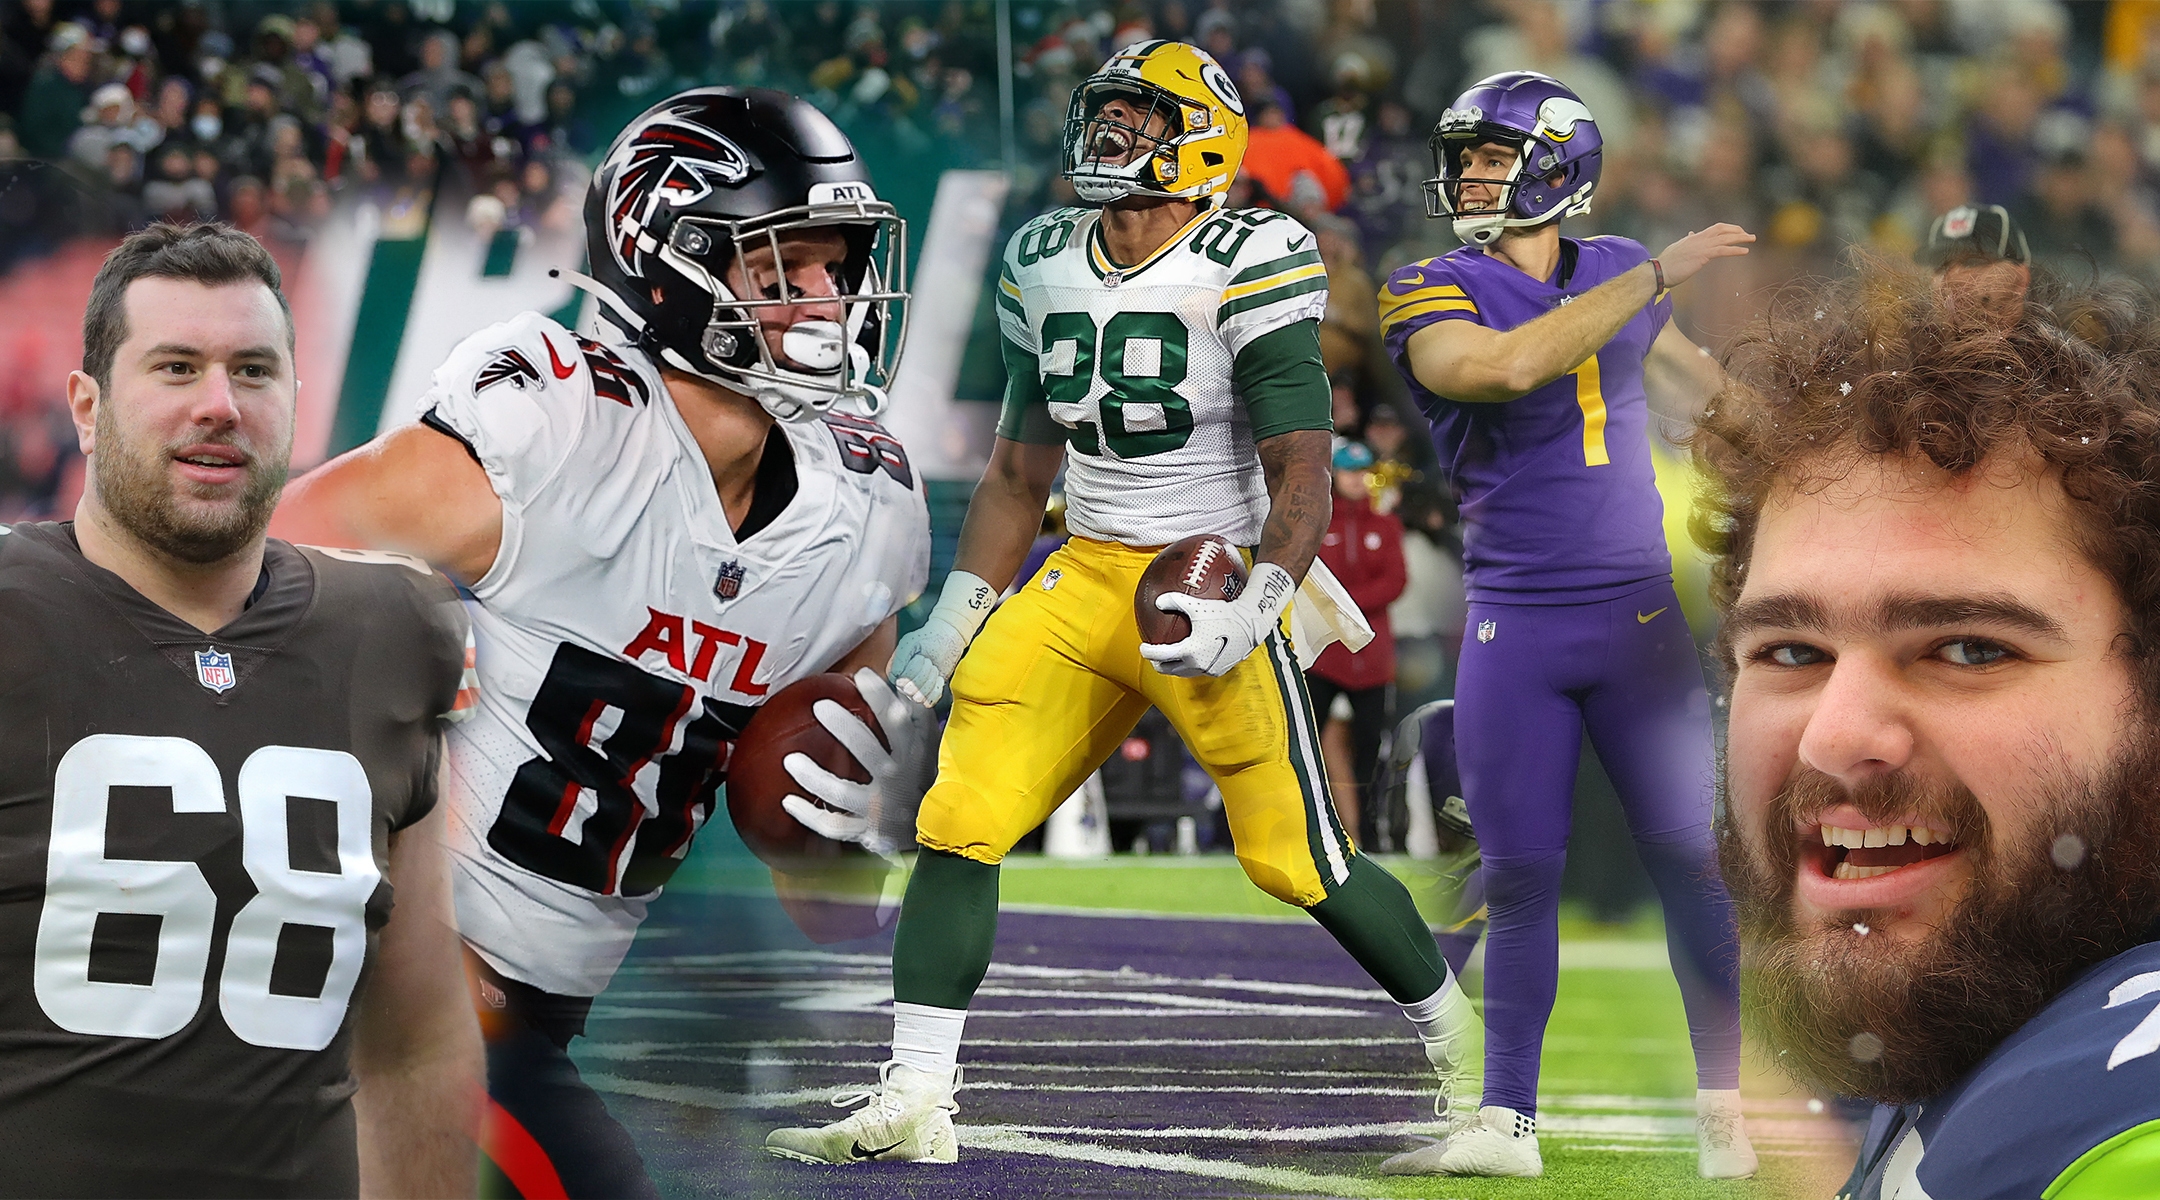 From left: Michael Dunn, Anthony Firsker, A.J. Dillon, Greg Joseph and Jake Curhan are five NFL players to watch this season. (Getty Images/Design by Grace Yagel)